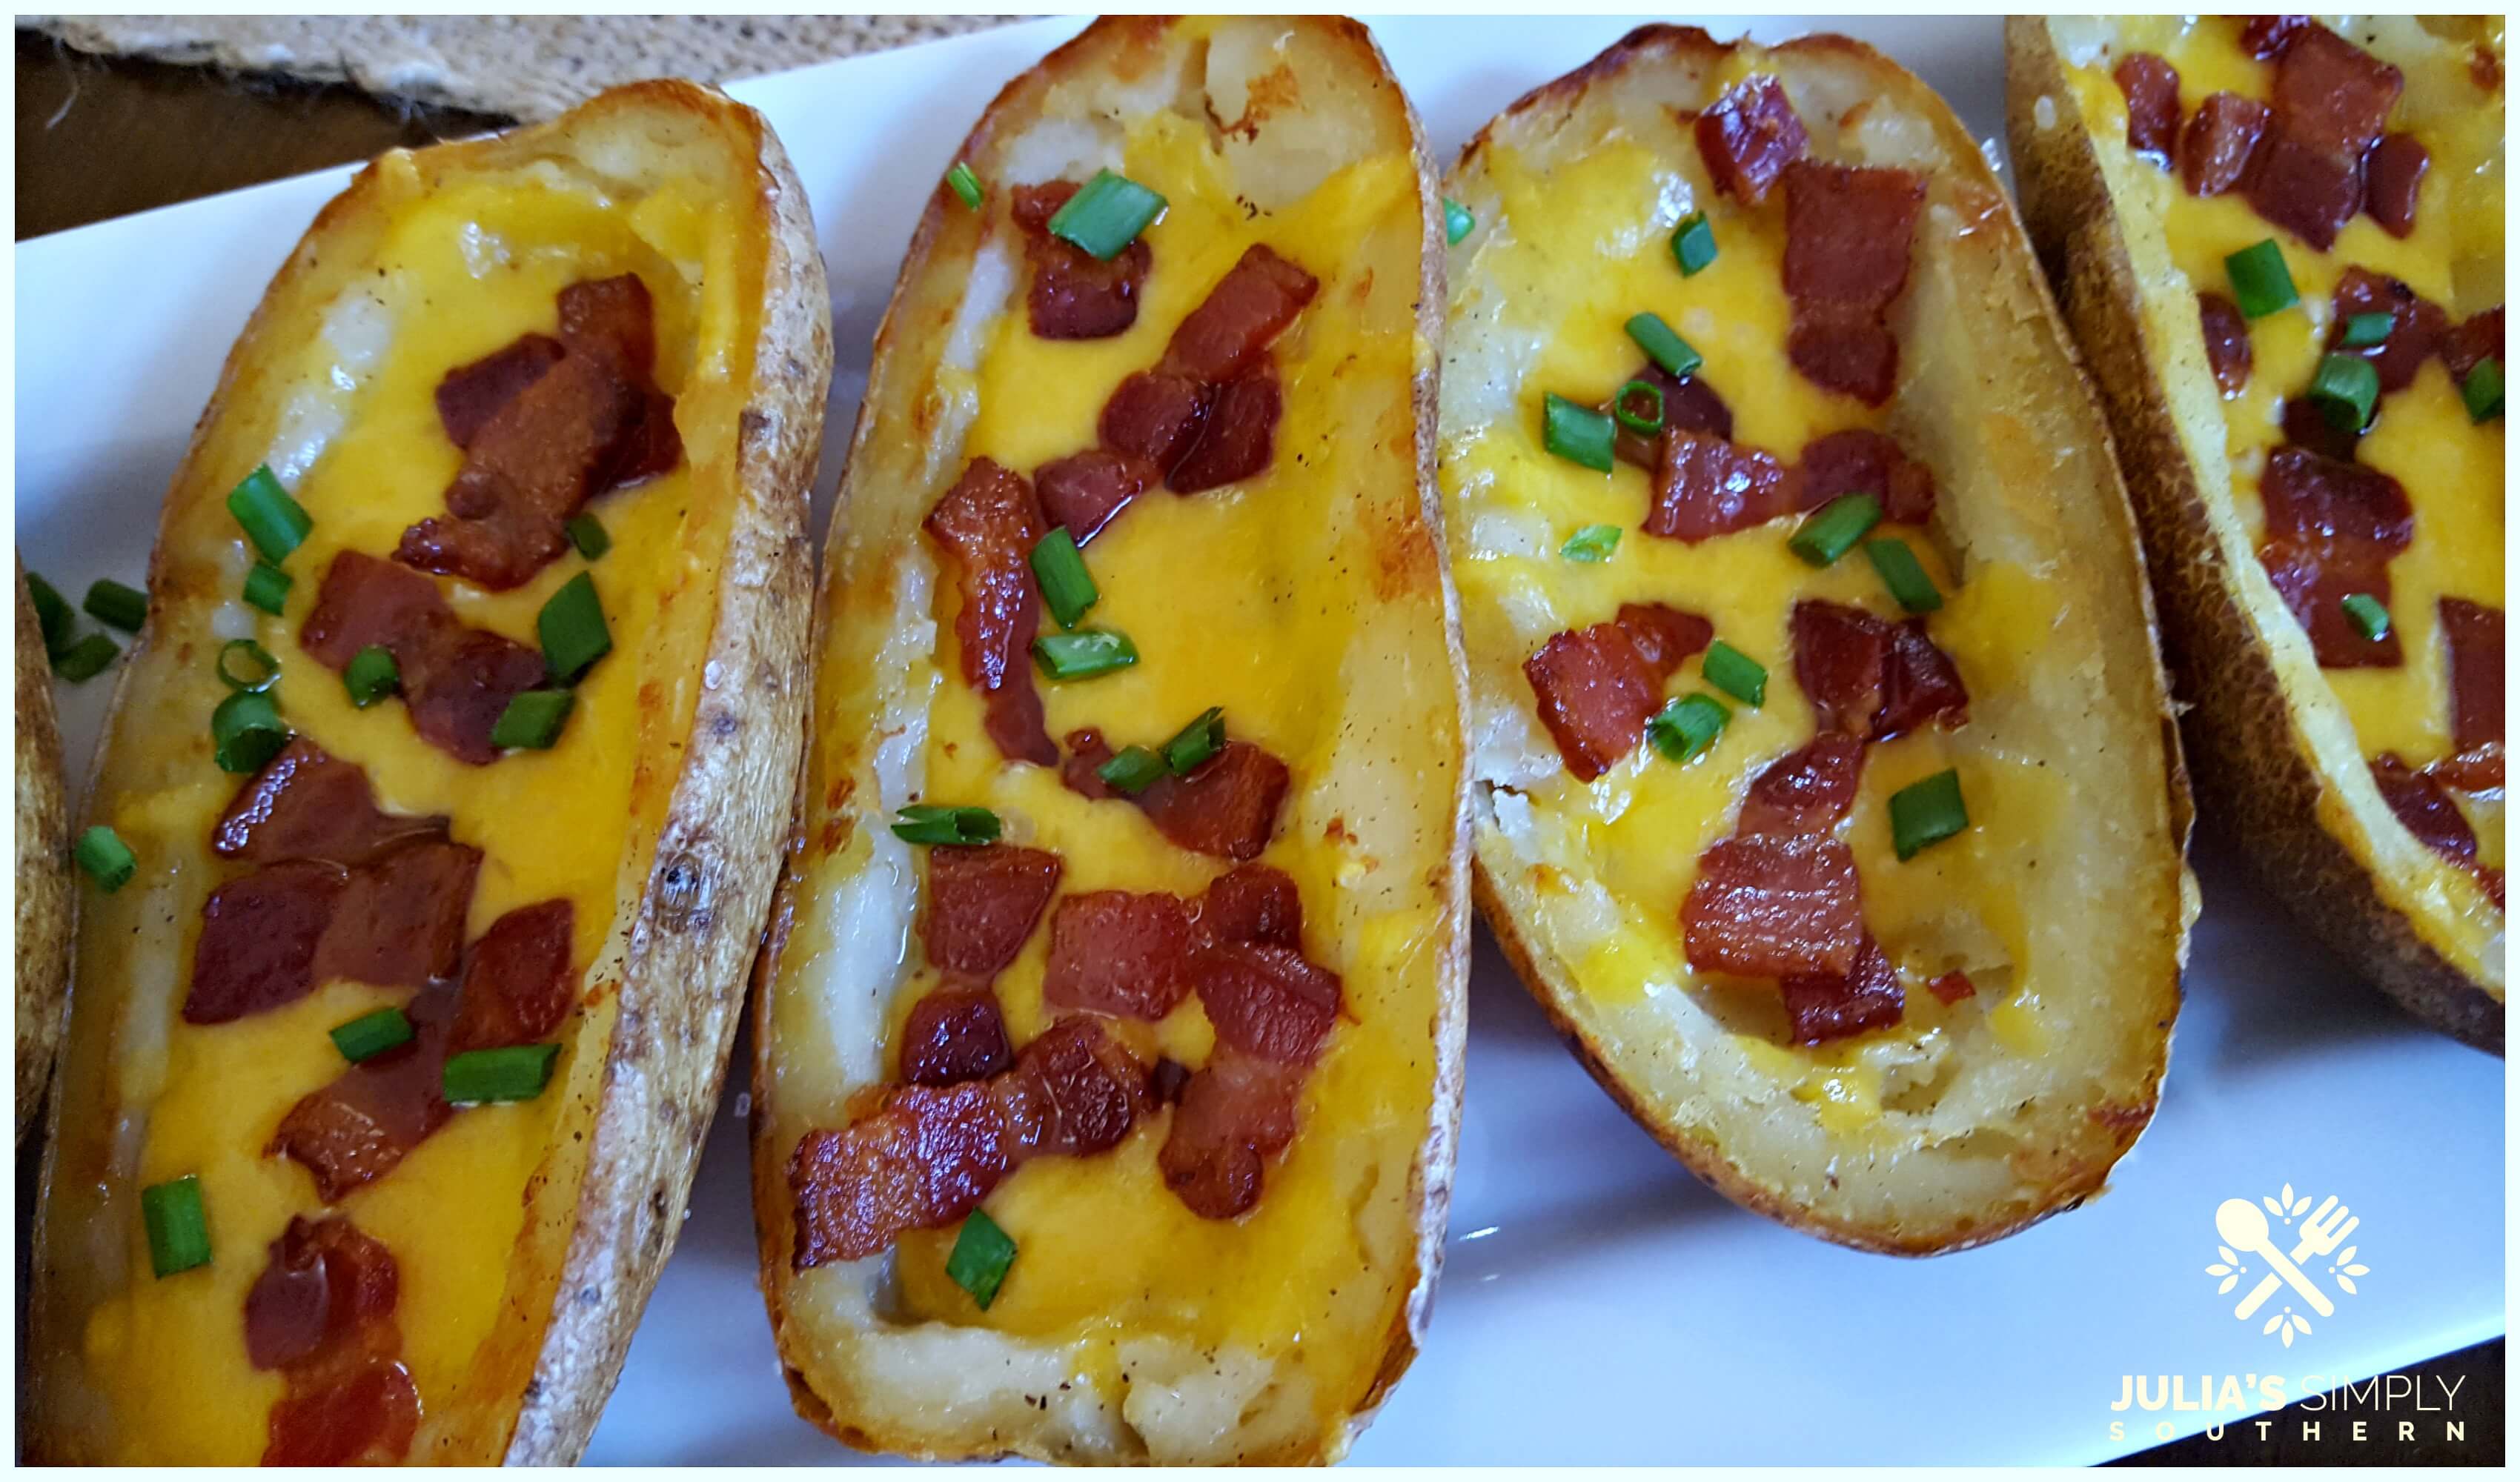 Delicious potato skins made with russet potatoes